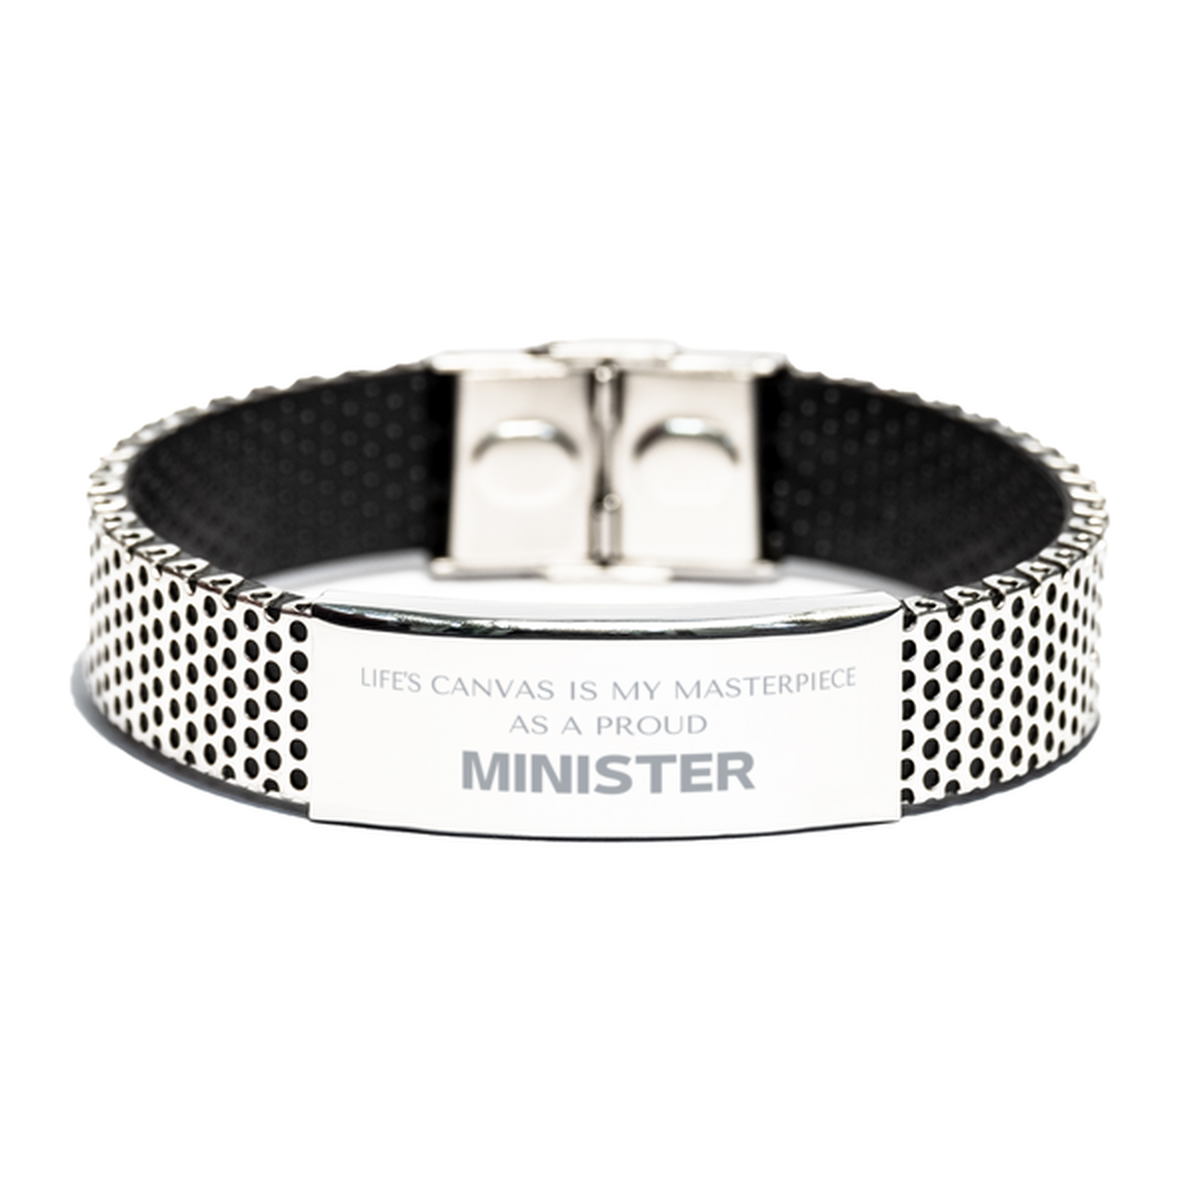 Proud Minister Gifts, Life's canvas is my masterpiece, Epic Birthday Christmas Unique Stainless Steel Bracelet For Minister, Coworkers, Men, Women, Friends